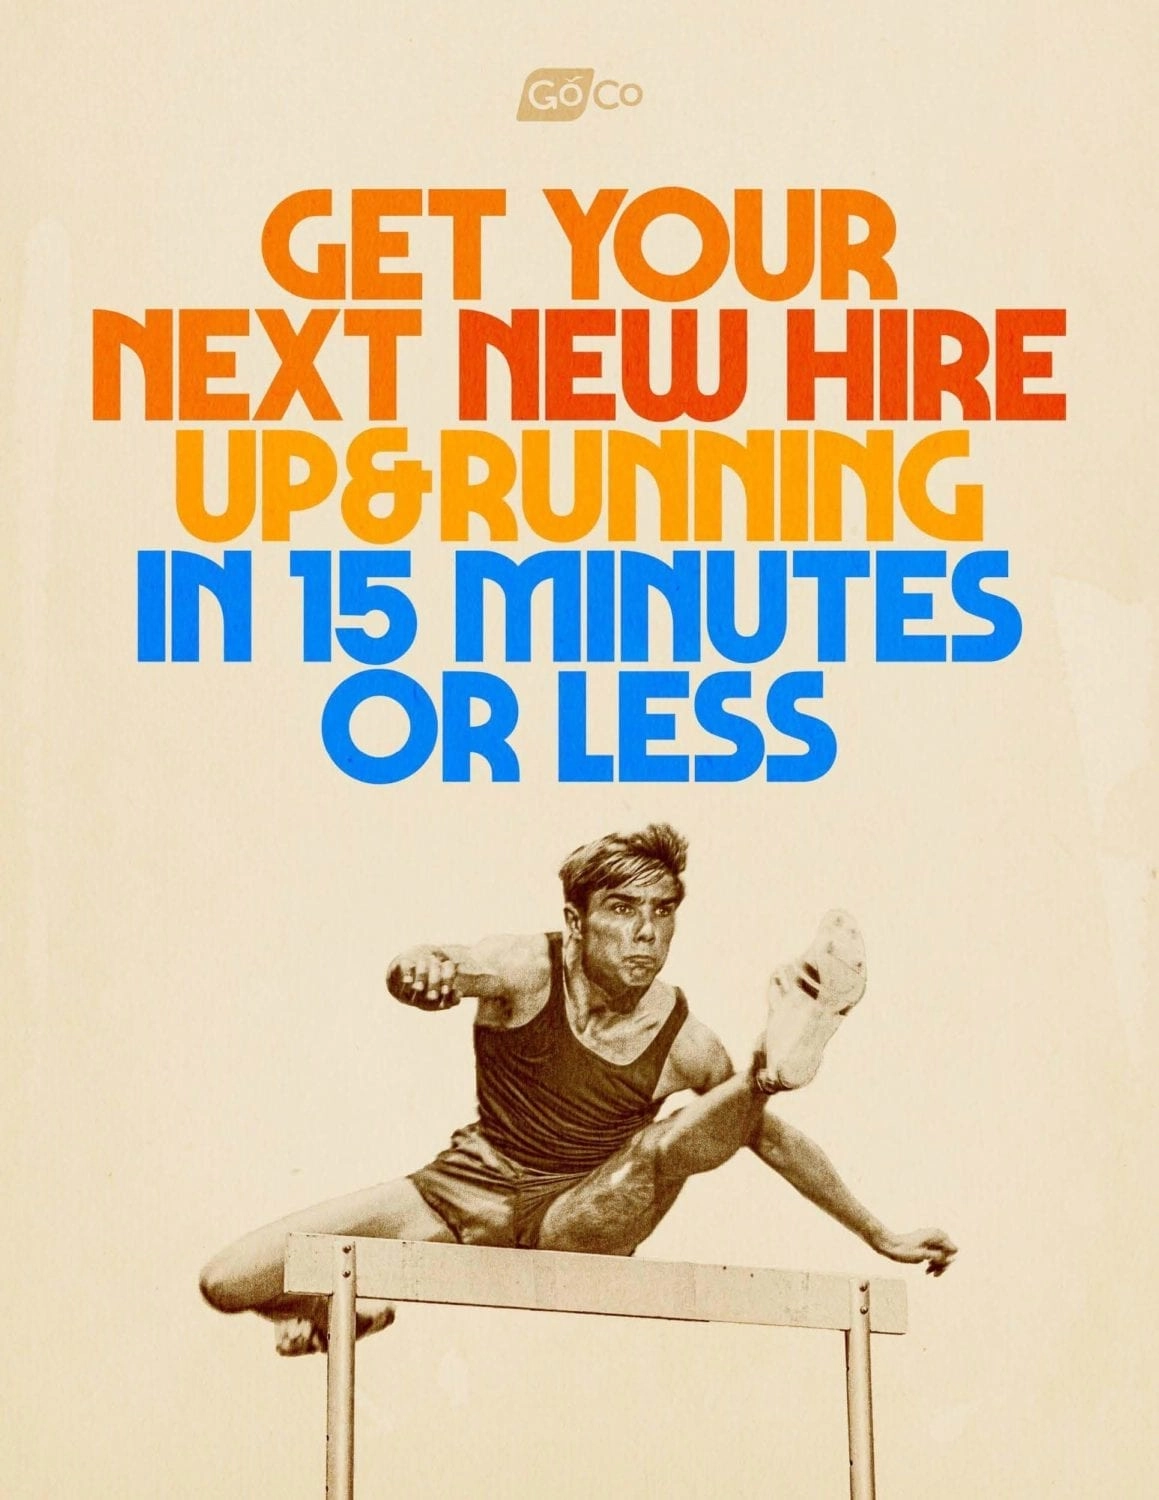 Get Your Next New Hire Up and Running in 15 Minutes or Less